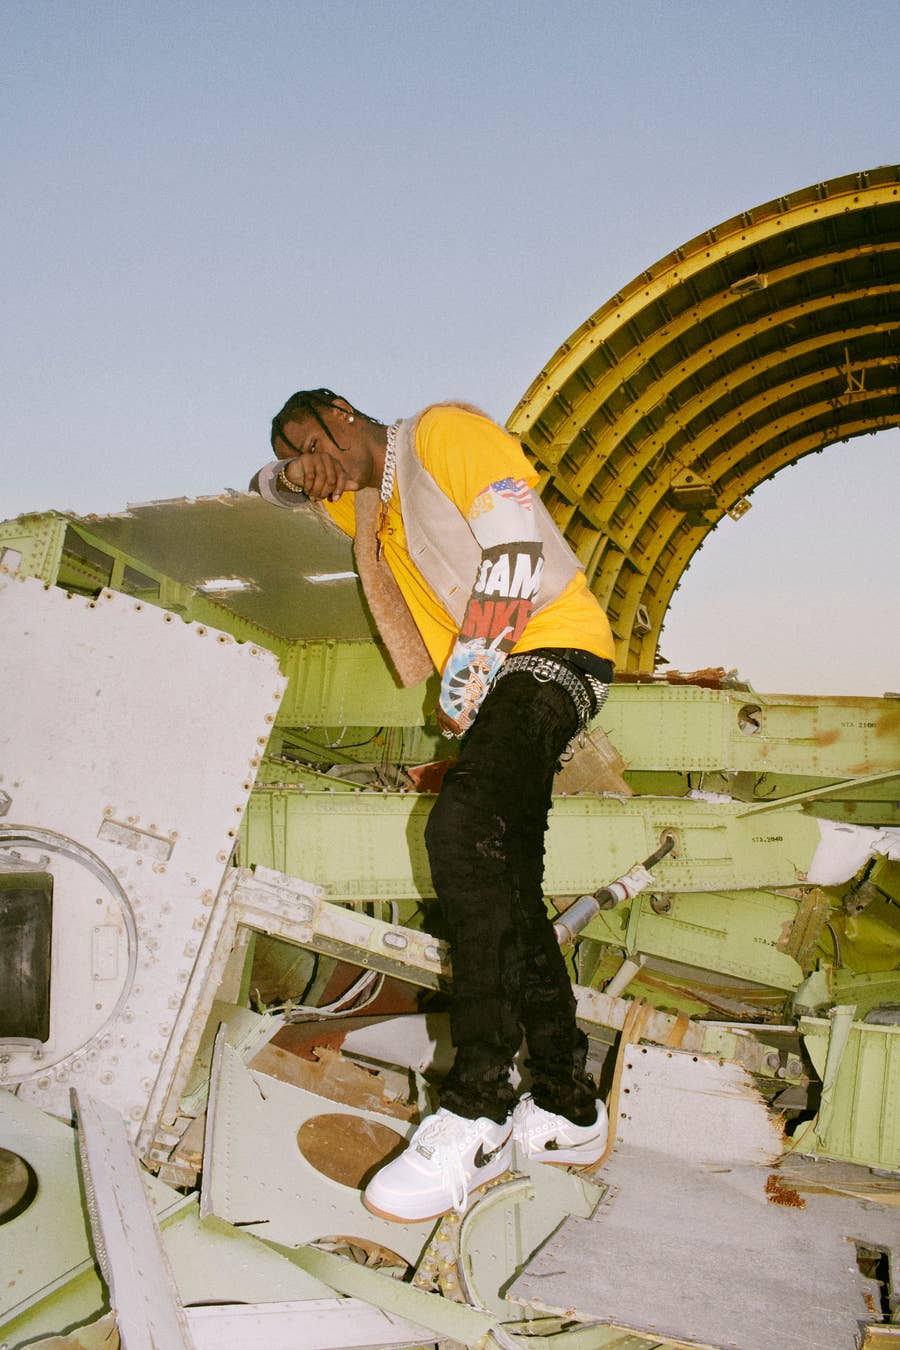 Complex Sneakers on X: Travis Scott with the graffiti tagged